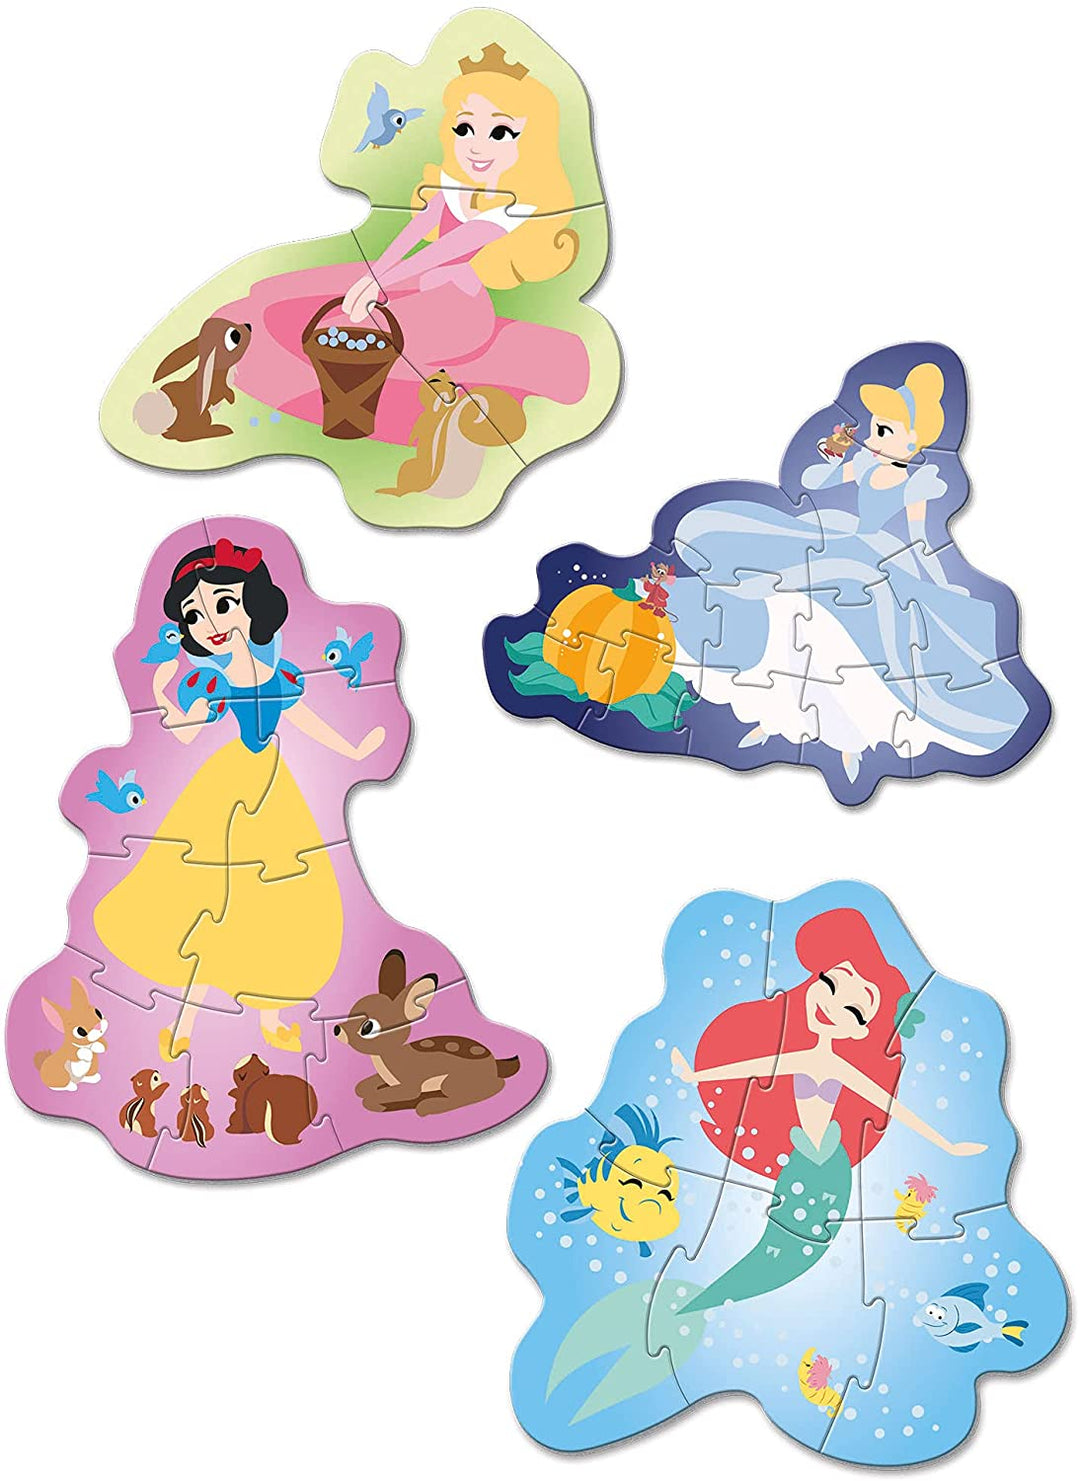 Clementoni – 20825 – My First Puzzle Play For Future – Disney Princess – 3+6+9+1